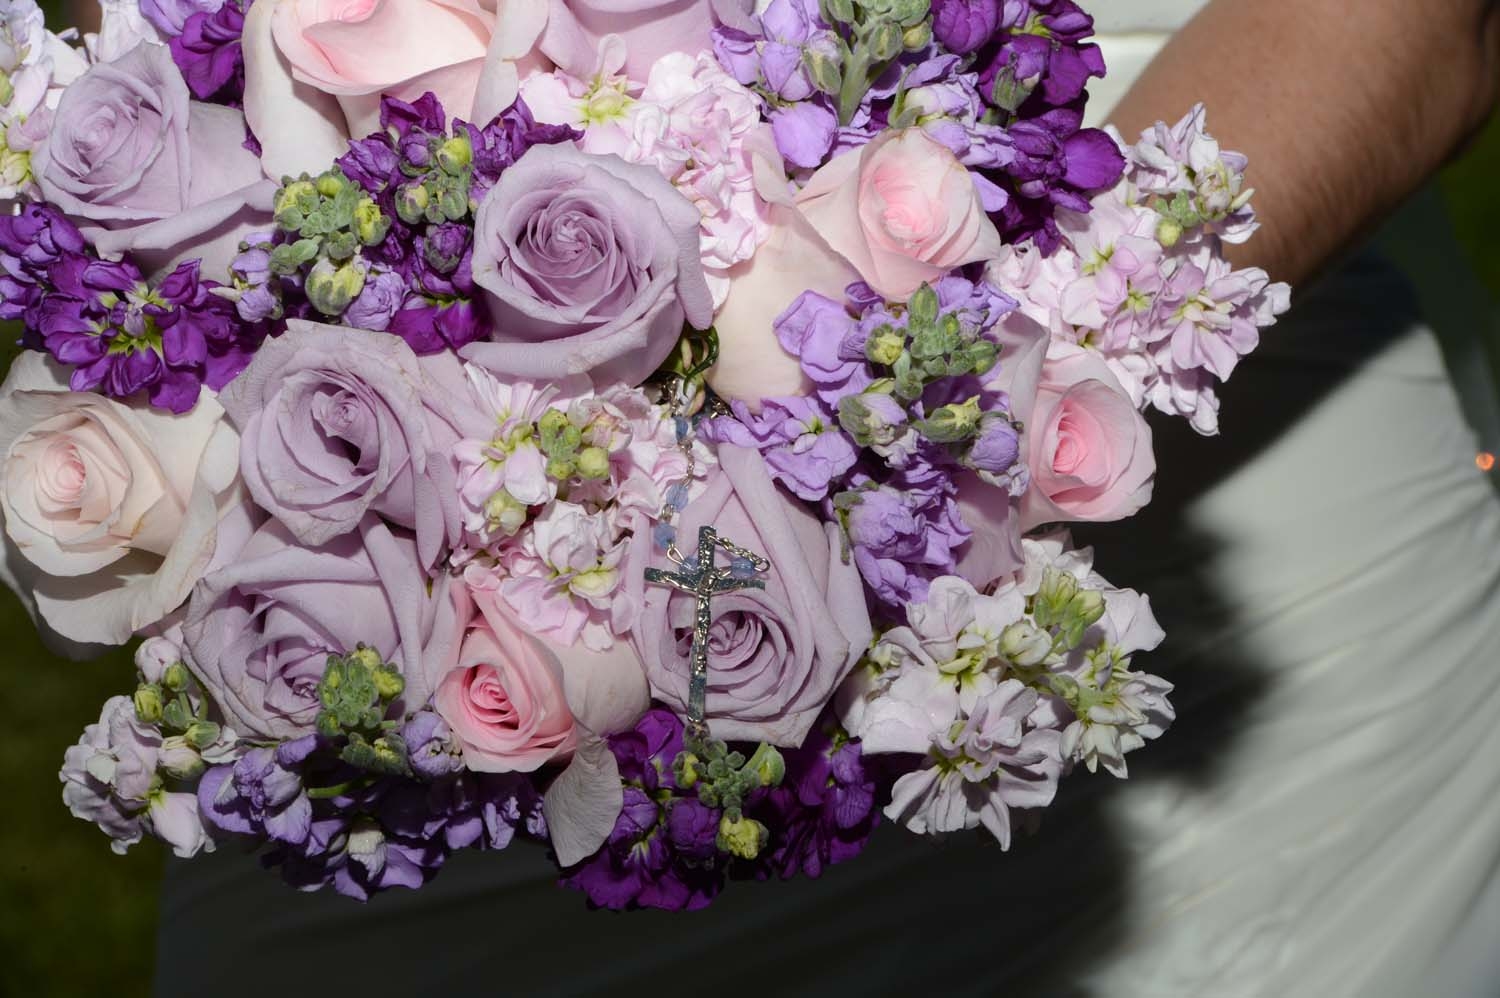 Bridal bouquet of pink and lavender roses with purple and lavender stock.